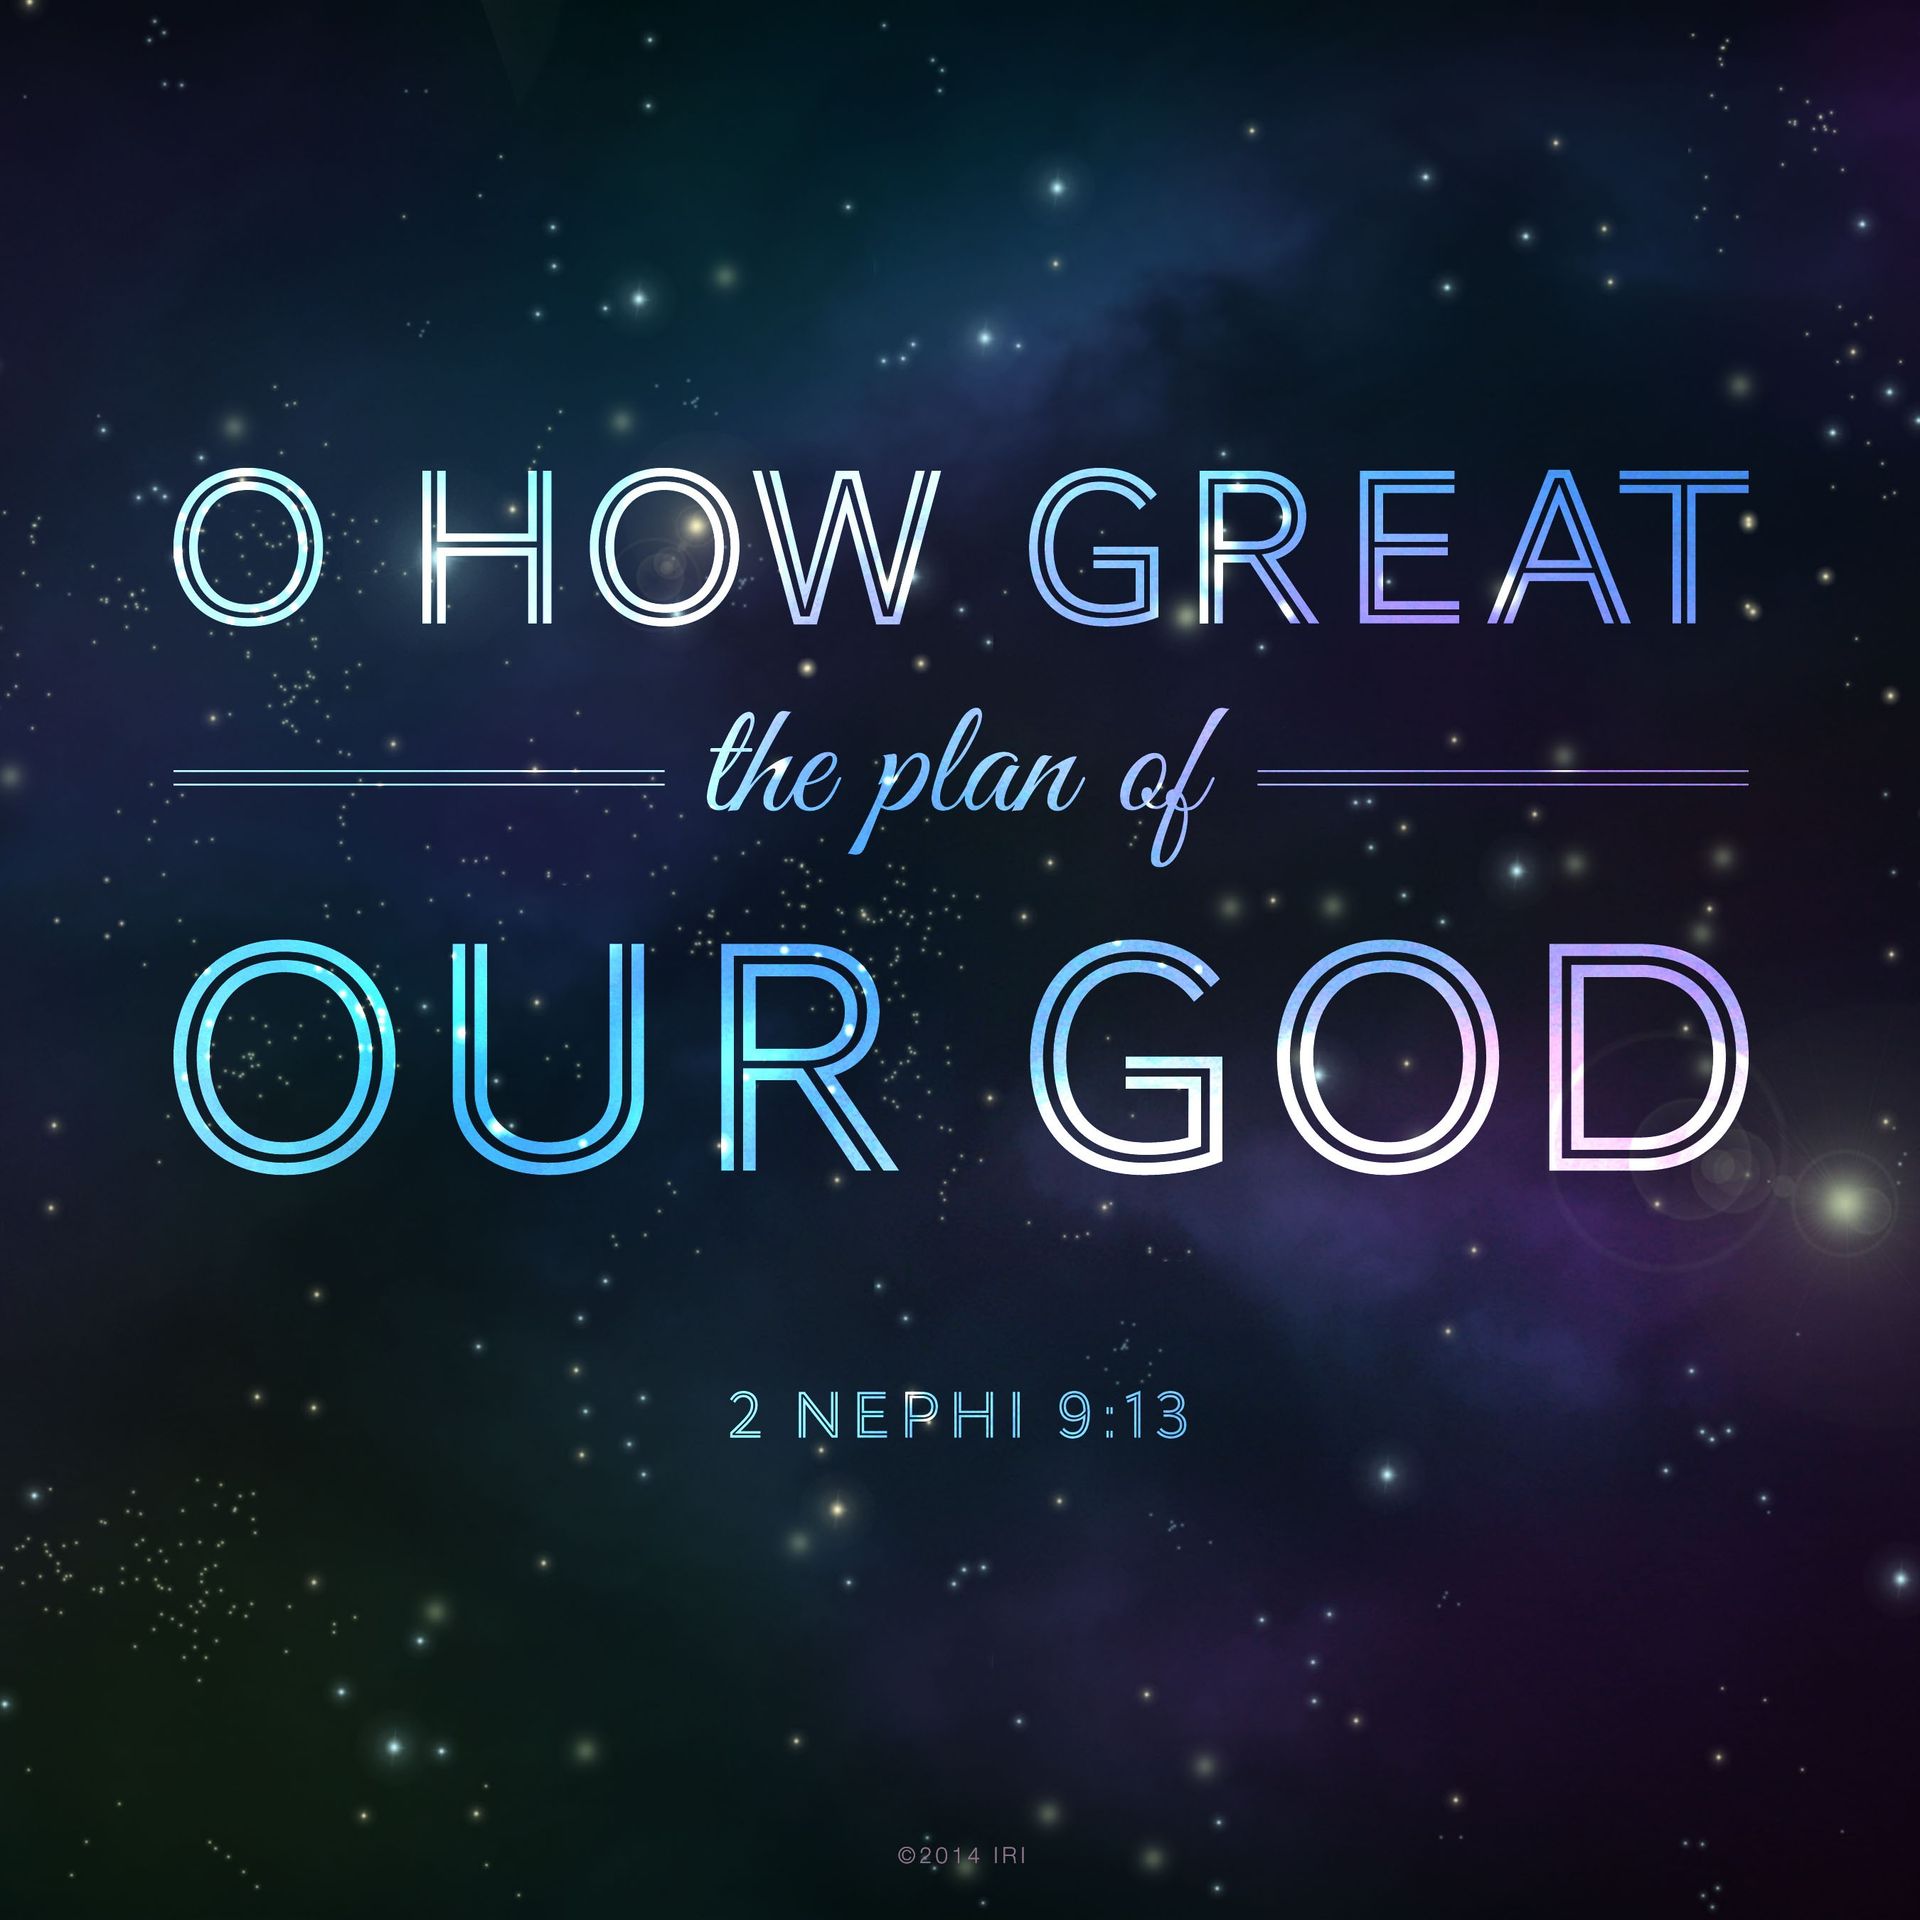 “O how great the plan of our God!”—2 Nephi 9:13